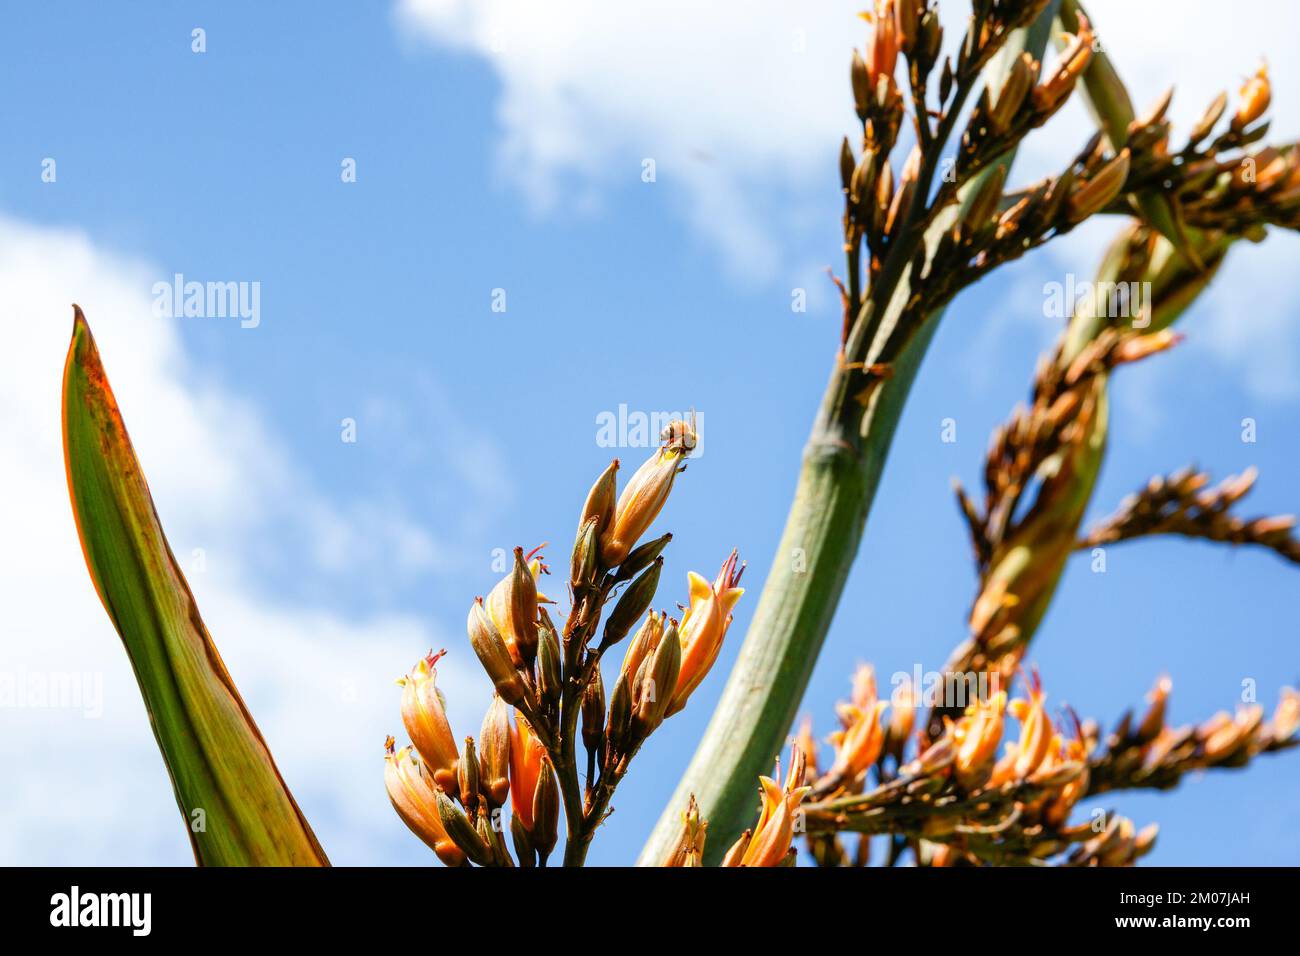 Closeup New Zealand flax flower showing detail against blue sky with white clouds Stock Photo